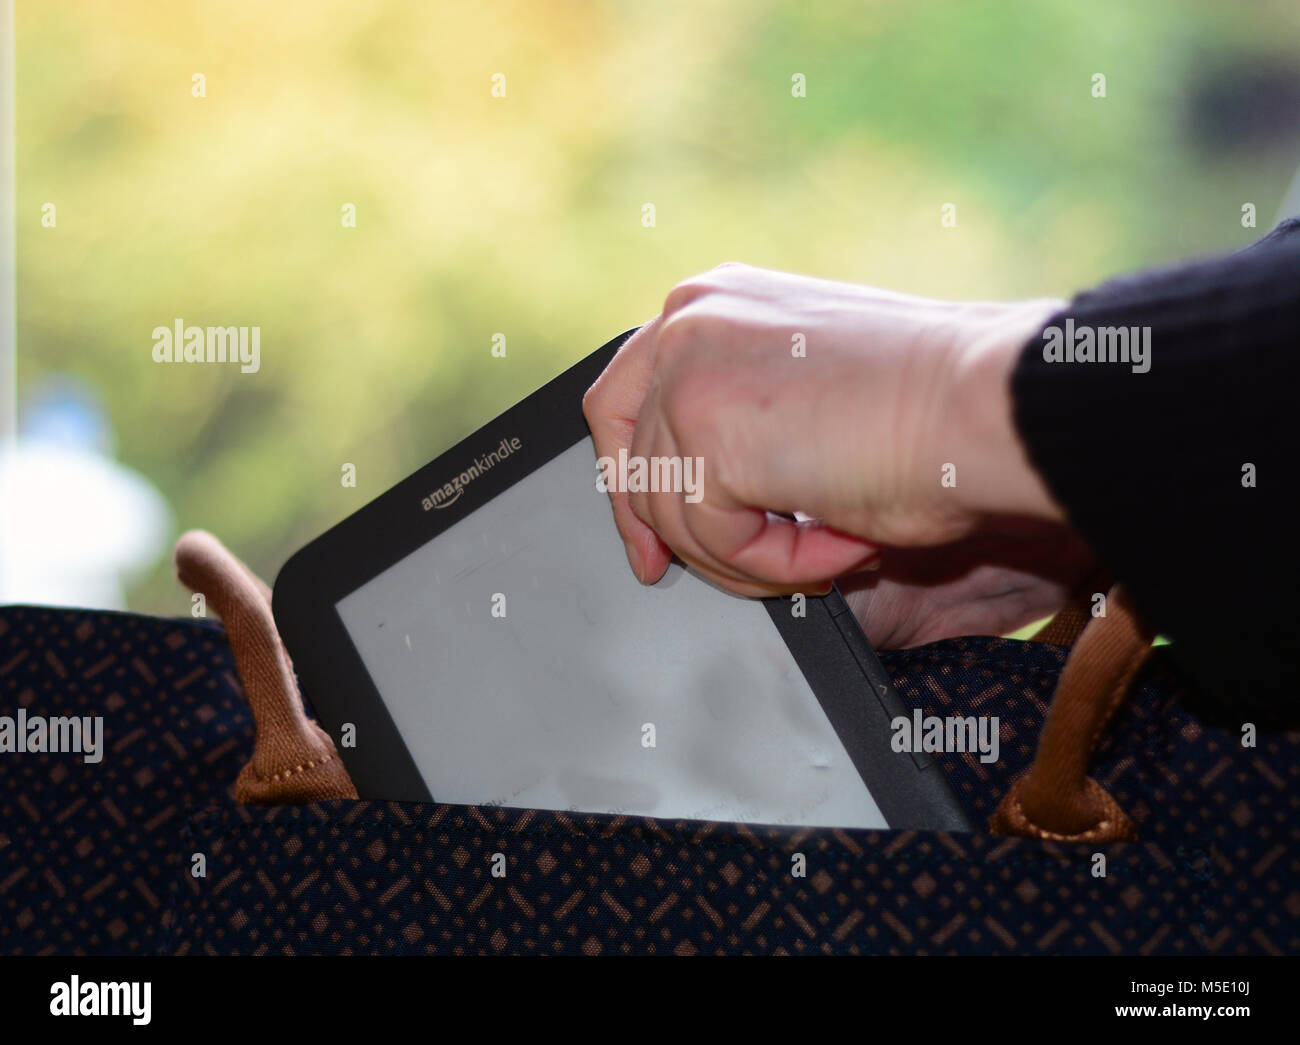 Woman putting a Kindle e-reader into her handbag (packing for holiday/morning commute concept) Stock Photo